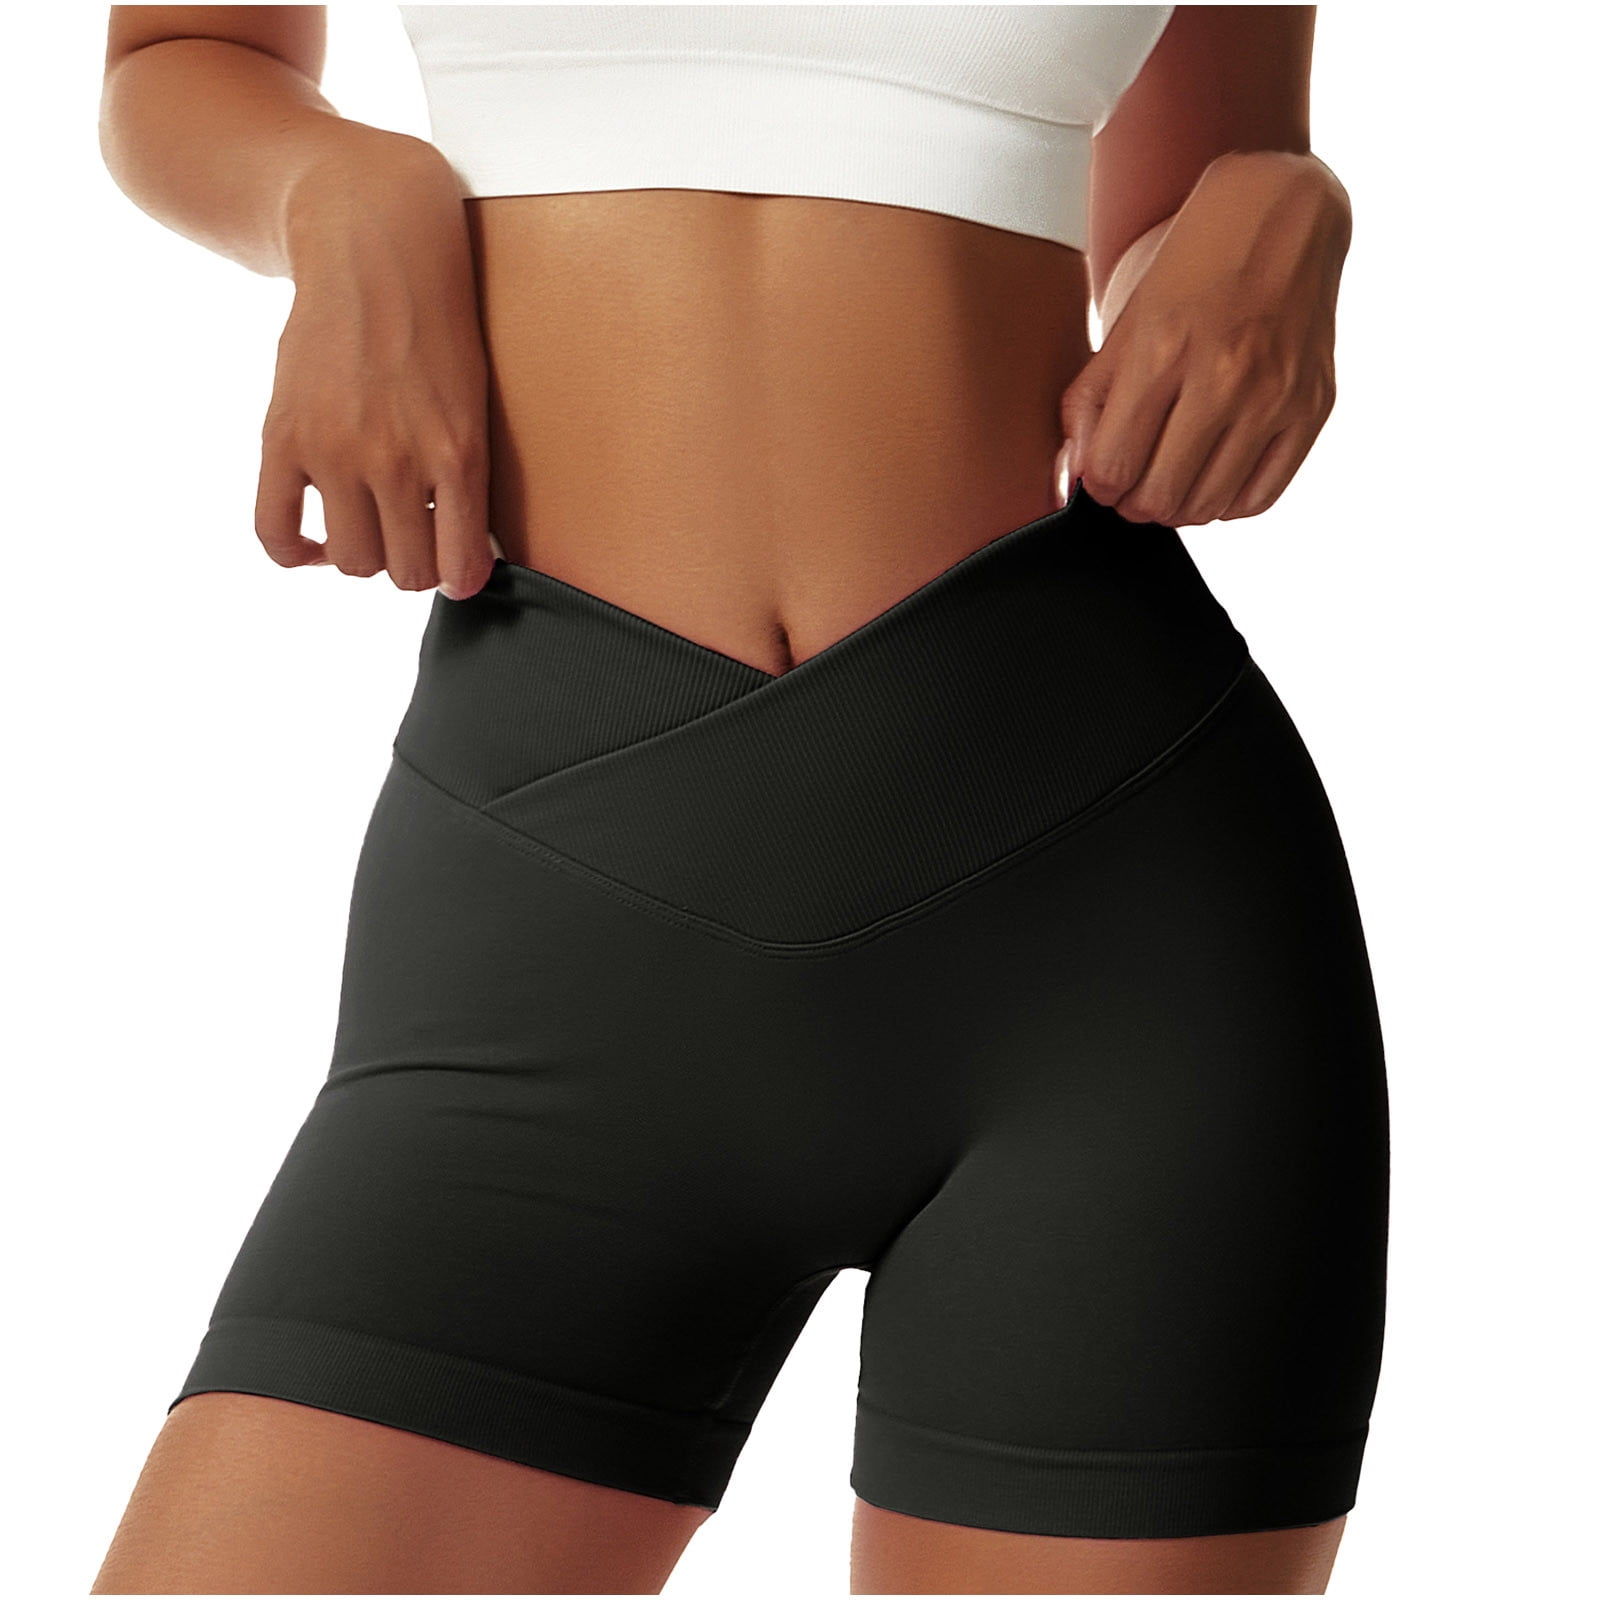 YYDGH Women's Crossover Biker Shorts Workout High Waisted Yoga Athletic  Running Gym Spandex Shorts with Side Pockets Black M